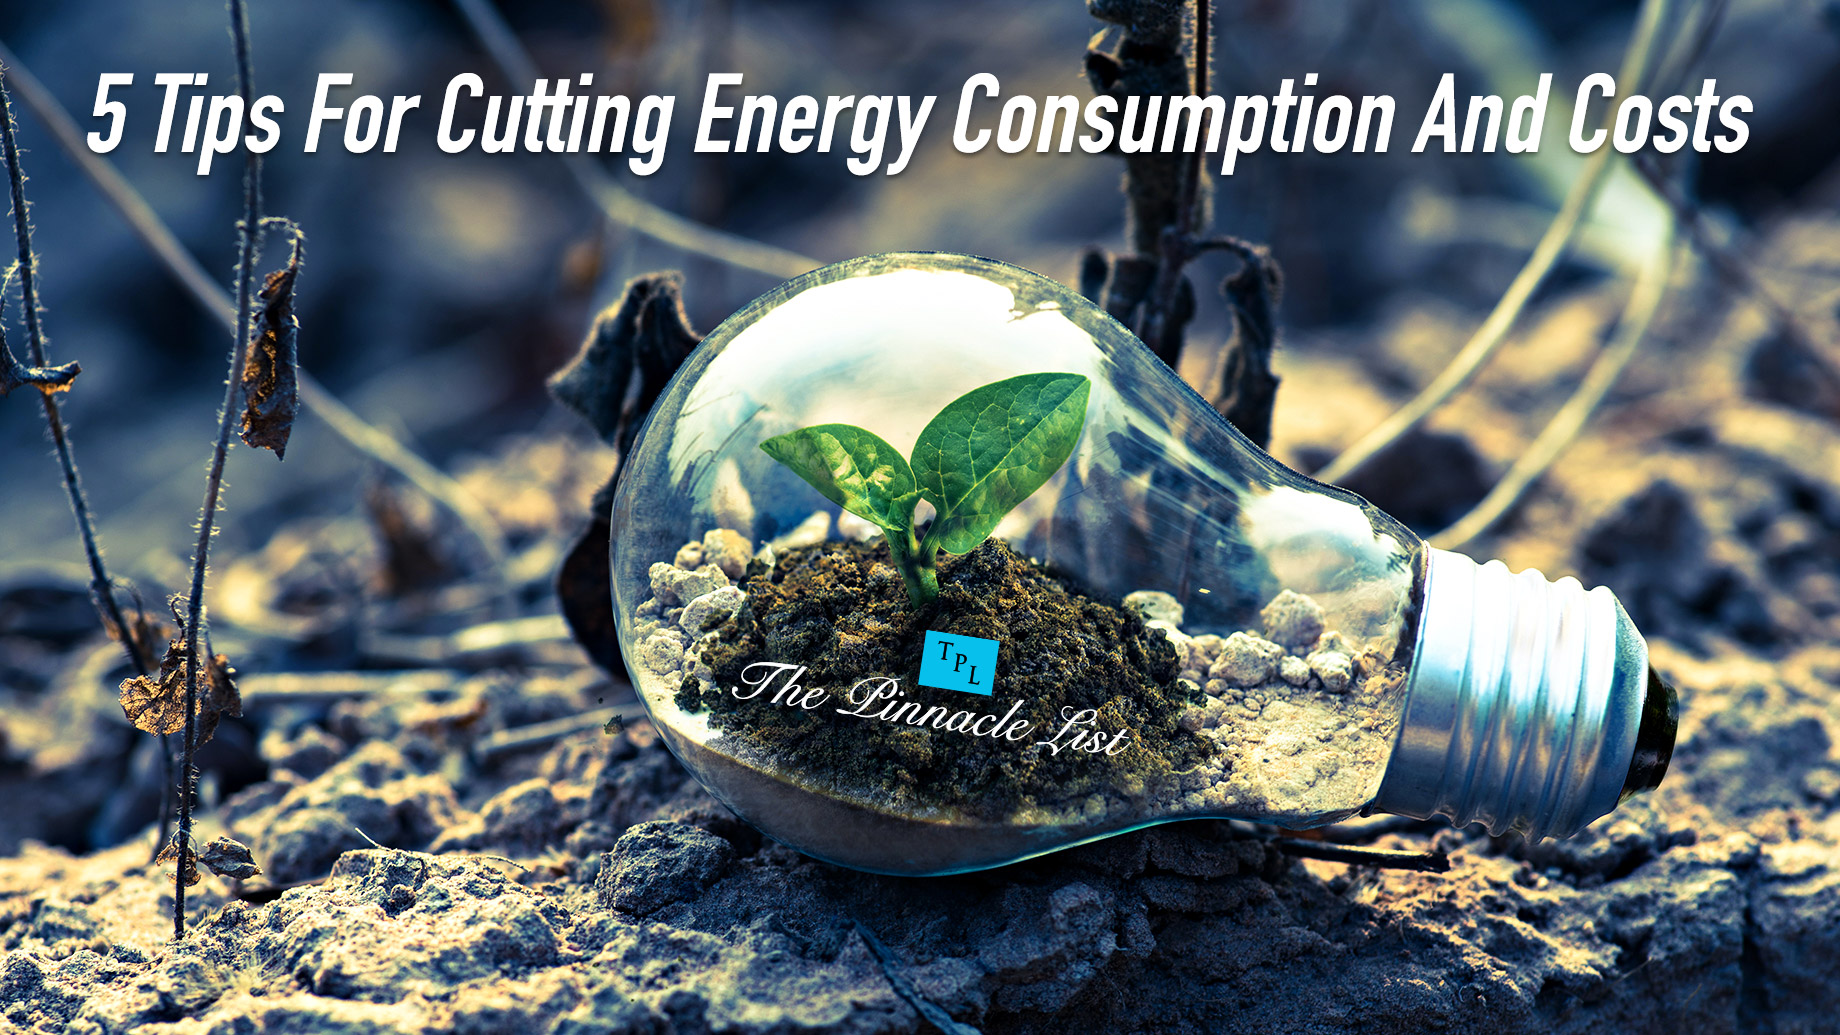 5 Tips For Cutting Energy Consumption And Costs